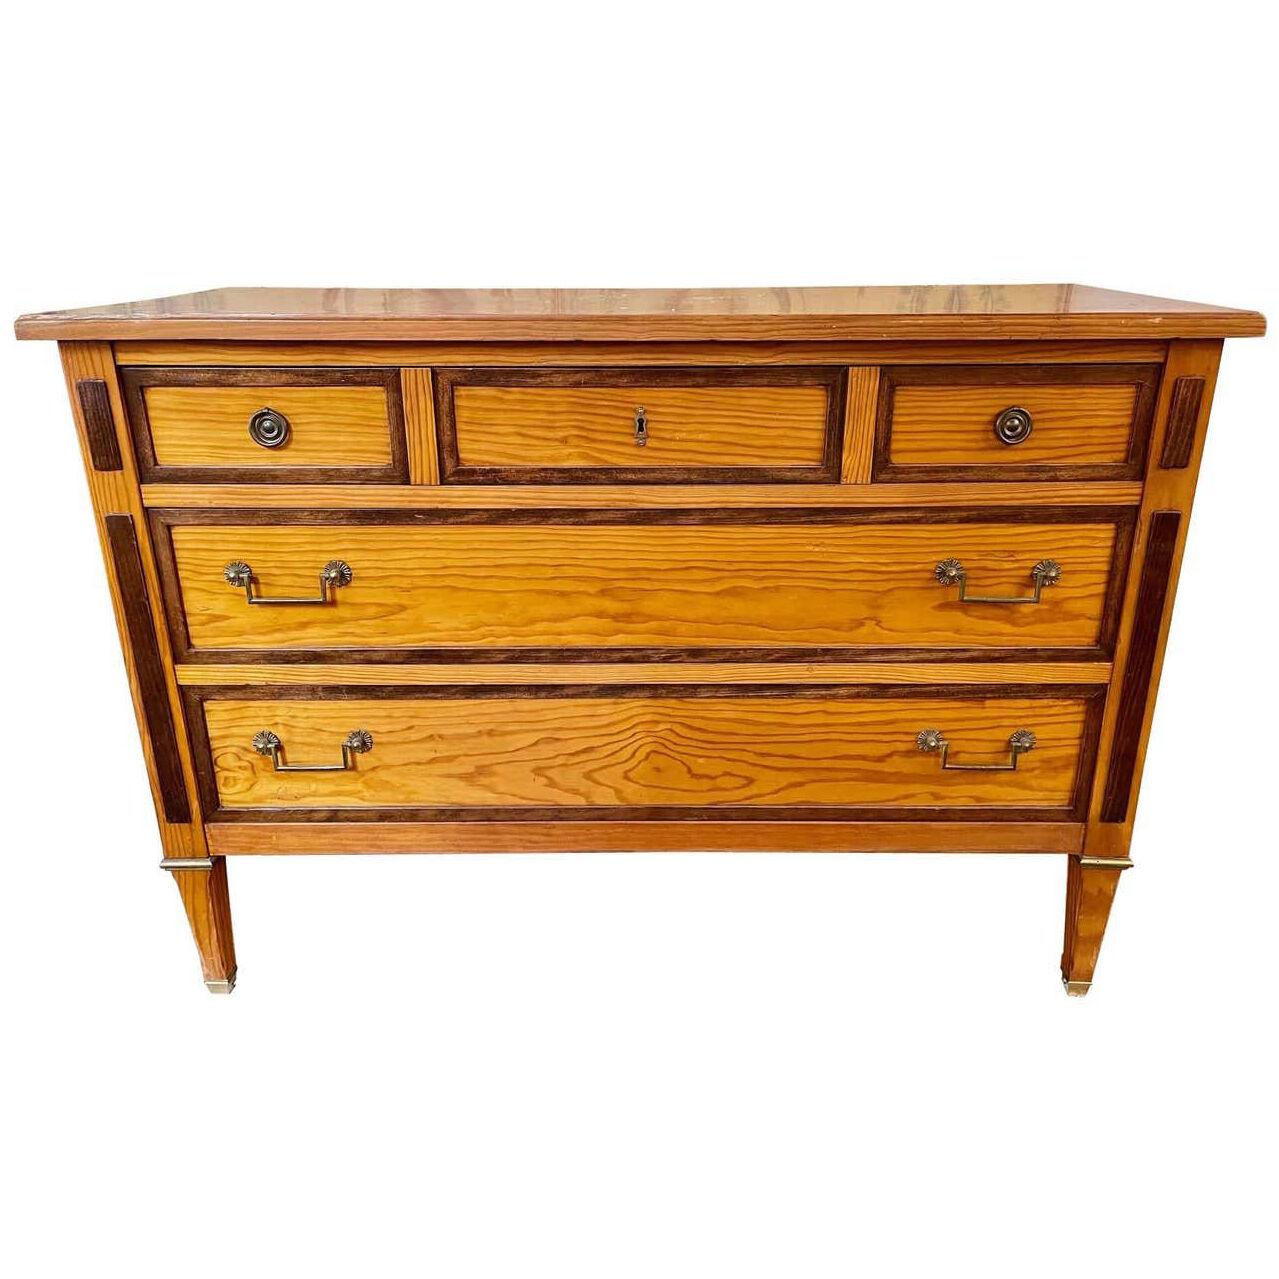 Early 20th Century French Louis XVI Maple Commode